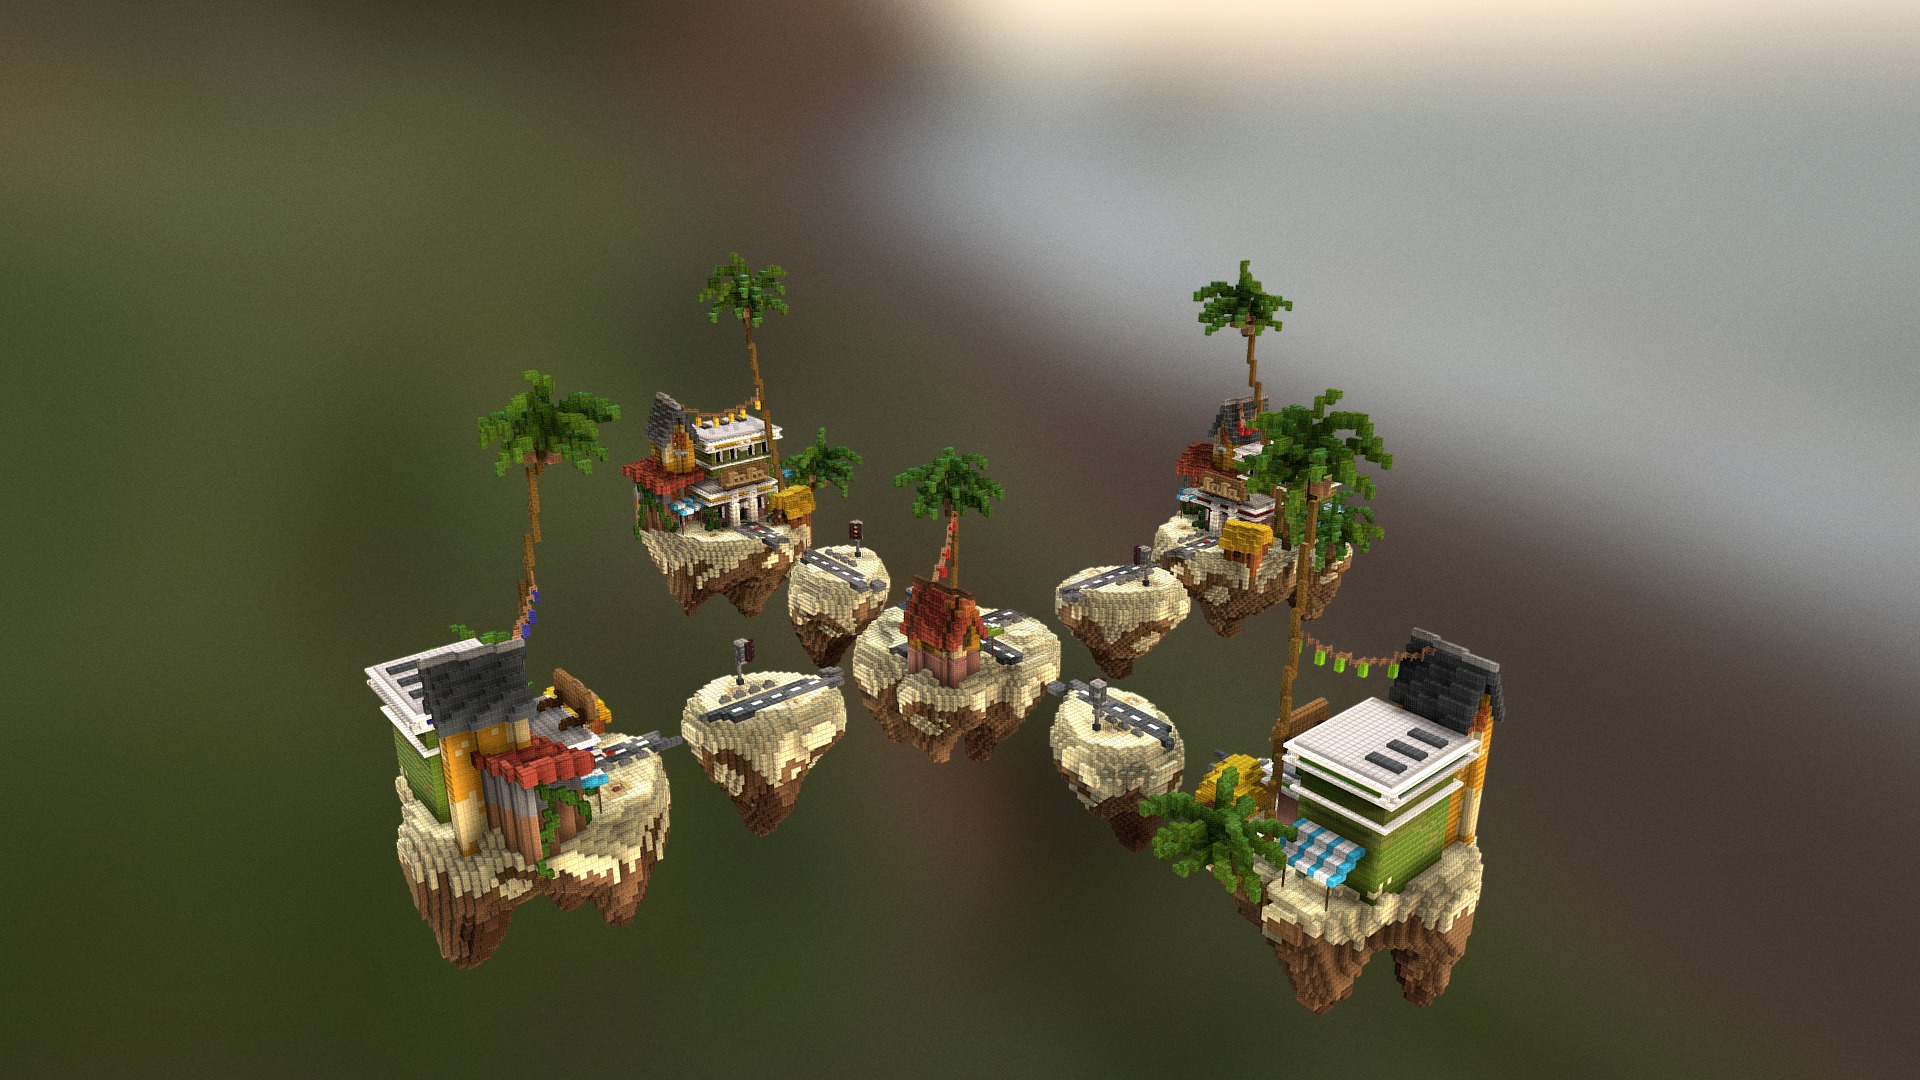 3D model Repose4x4bedwars - This is a 3D model of the Repose4x4bedwars. The 3D model is about a group of toy buildings in the water.